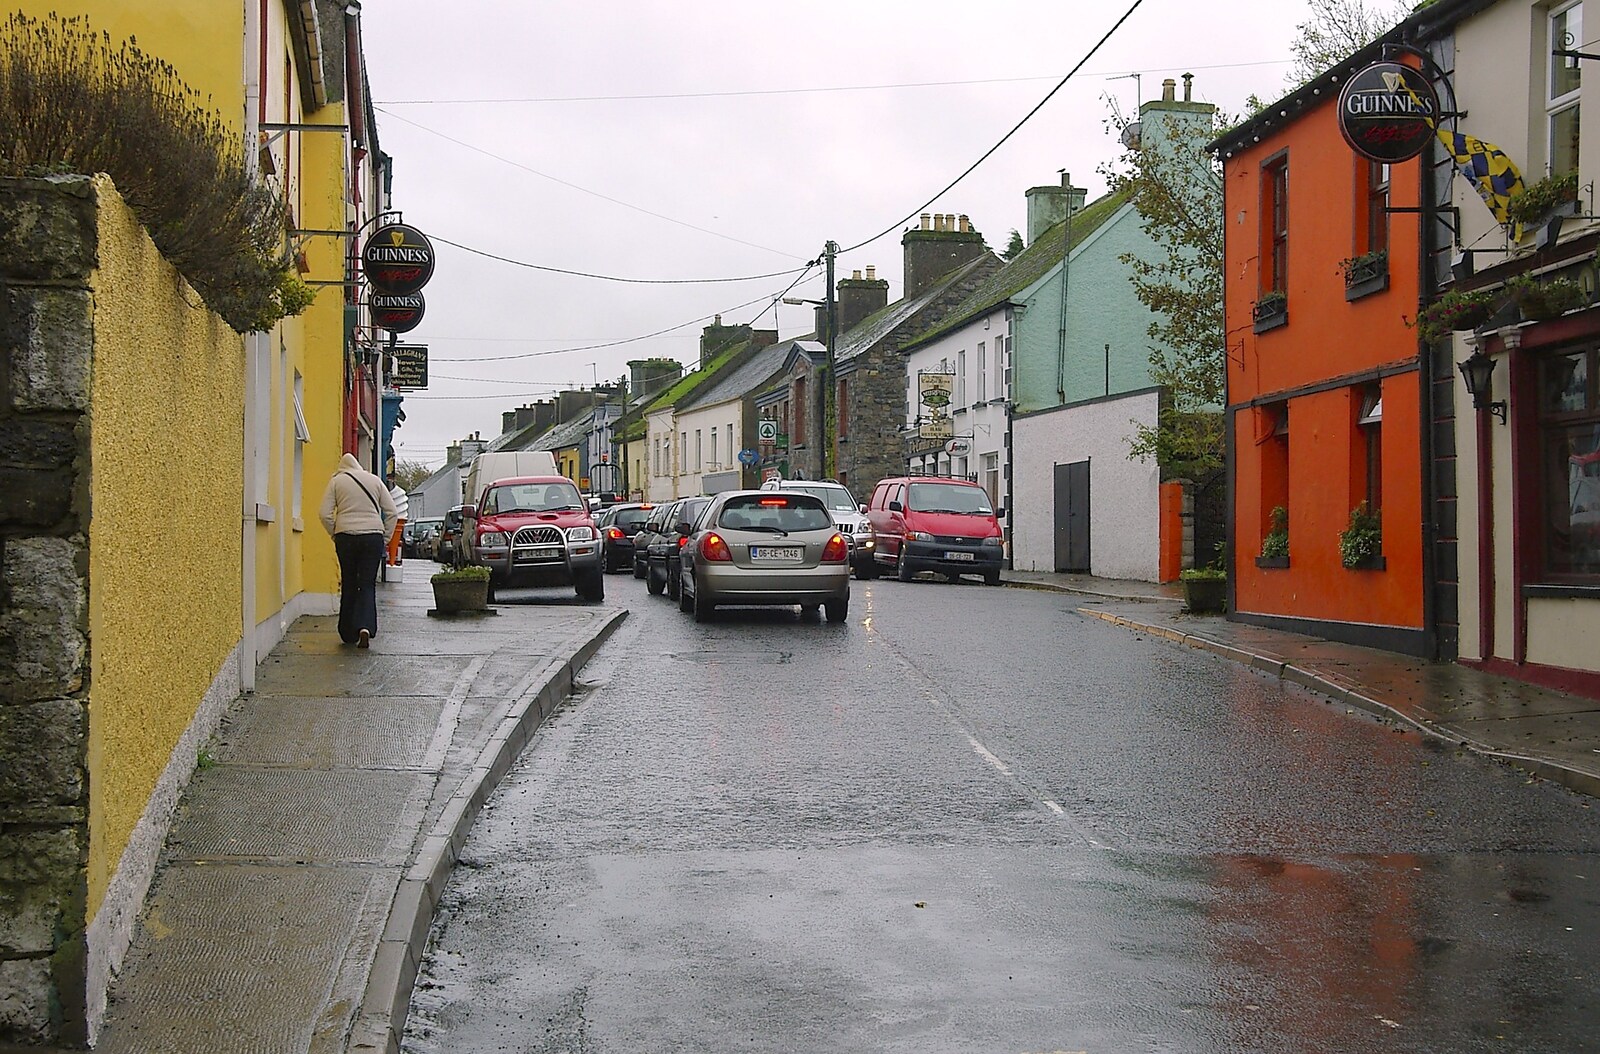 The main street of Corofin from Corofin, Ennistymon and The Burran, County Clare, Western Ireland - 27th October 2006